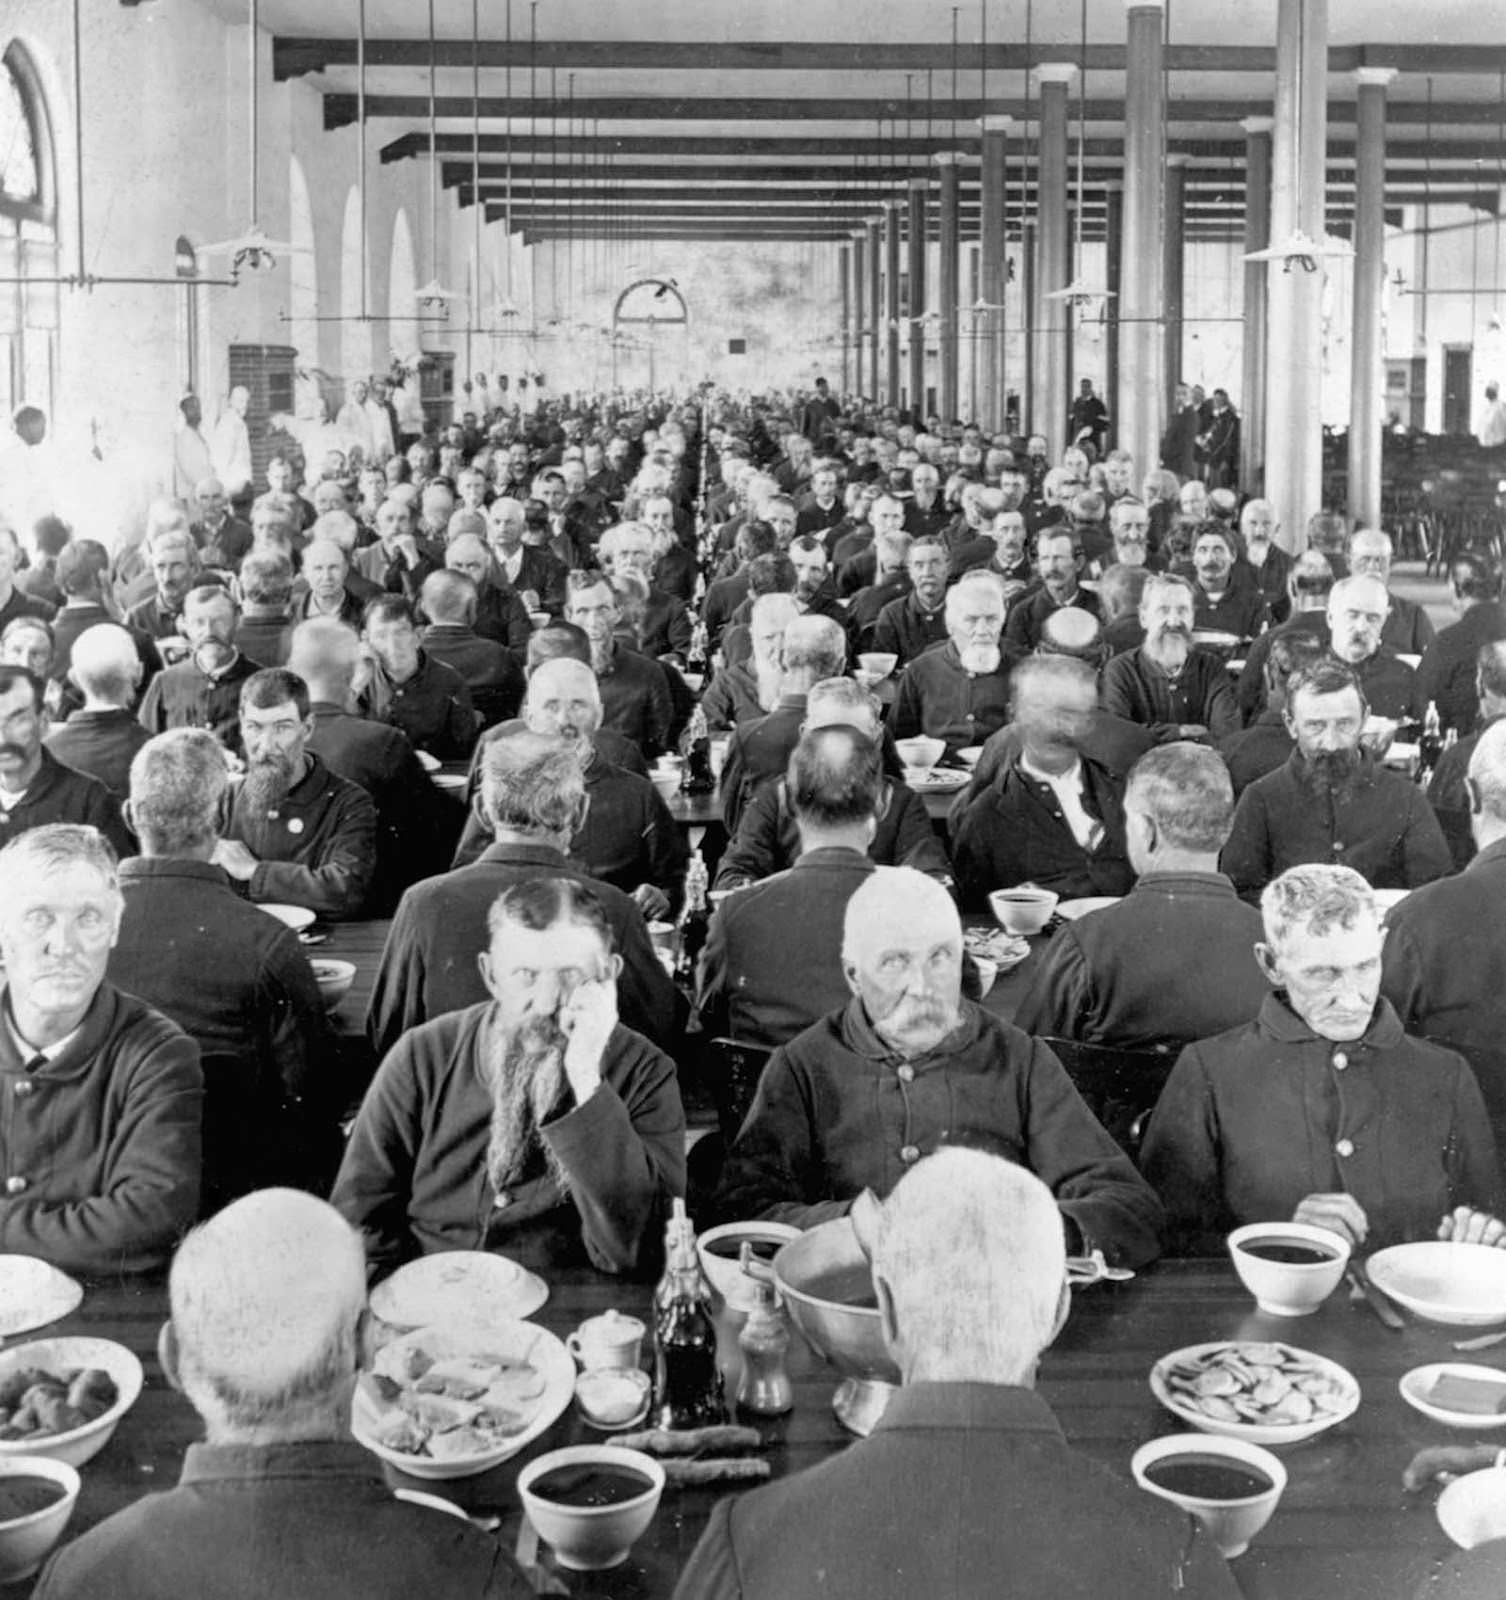 Marion, Indiana — Veterans eat their meals in the dining hall of the National Soldiers’ Home, a facility for the care of disabled American veterans, many from the Civil War. 1898.